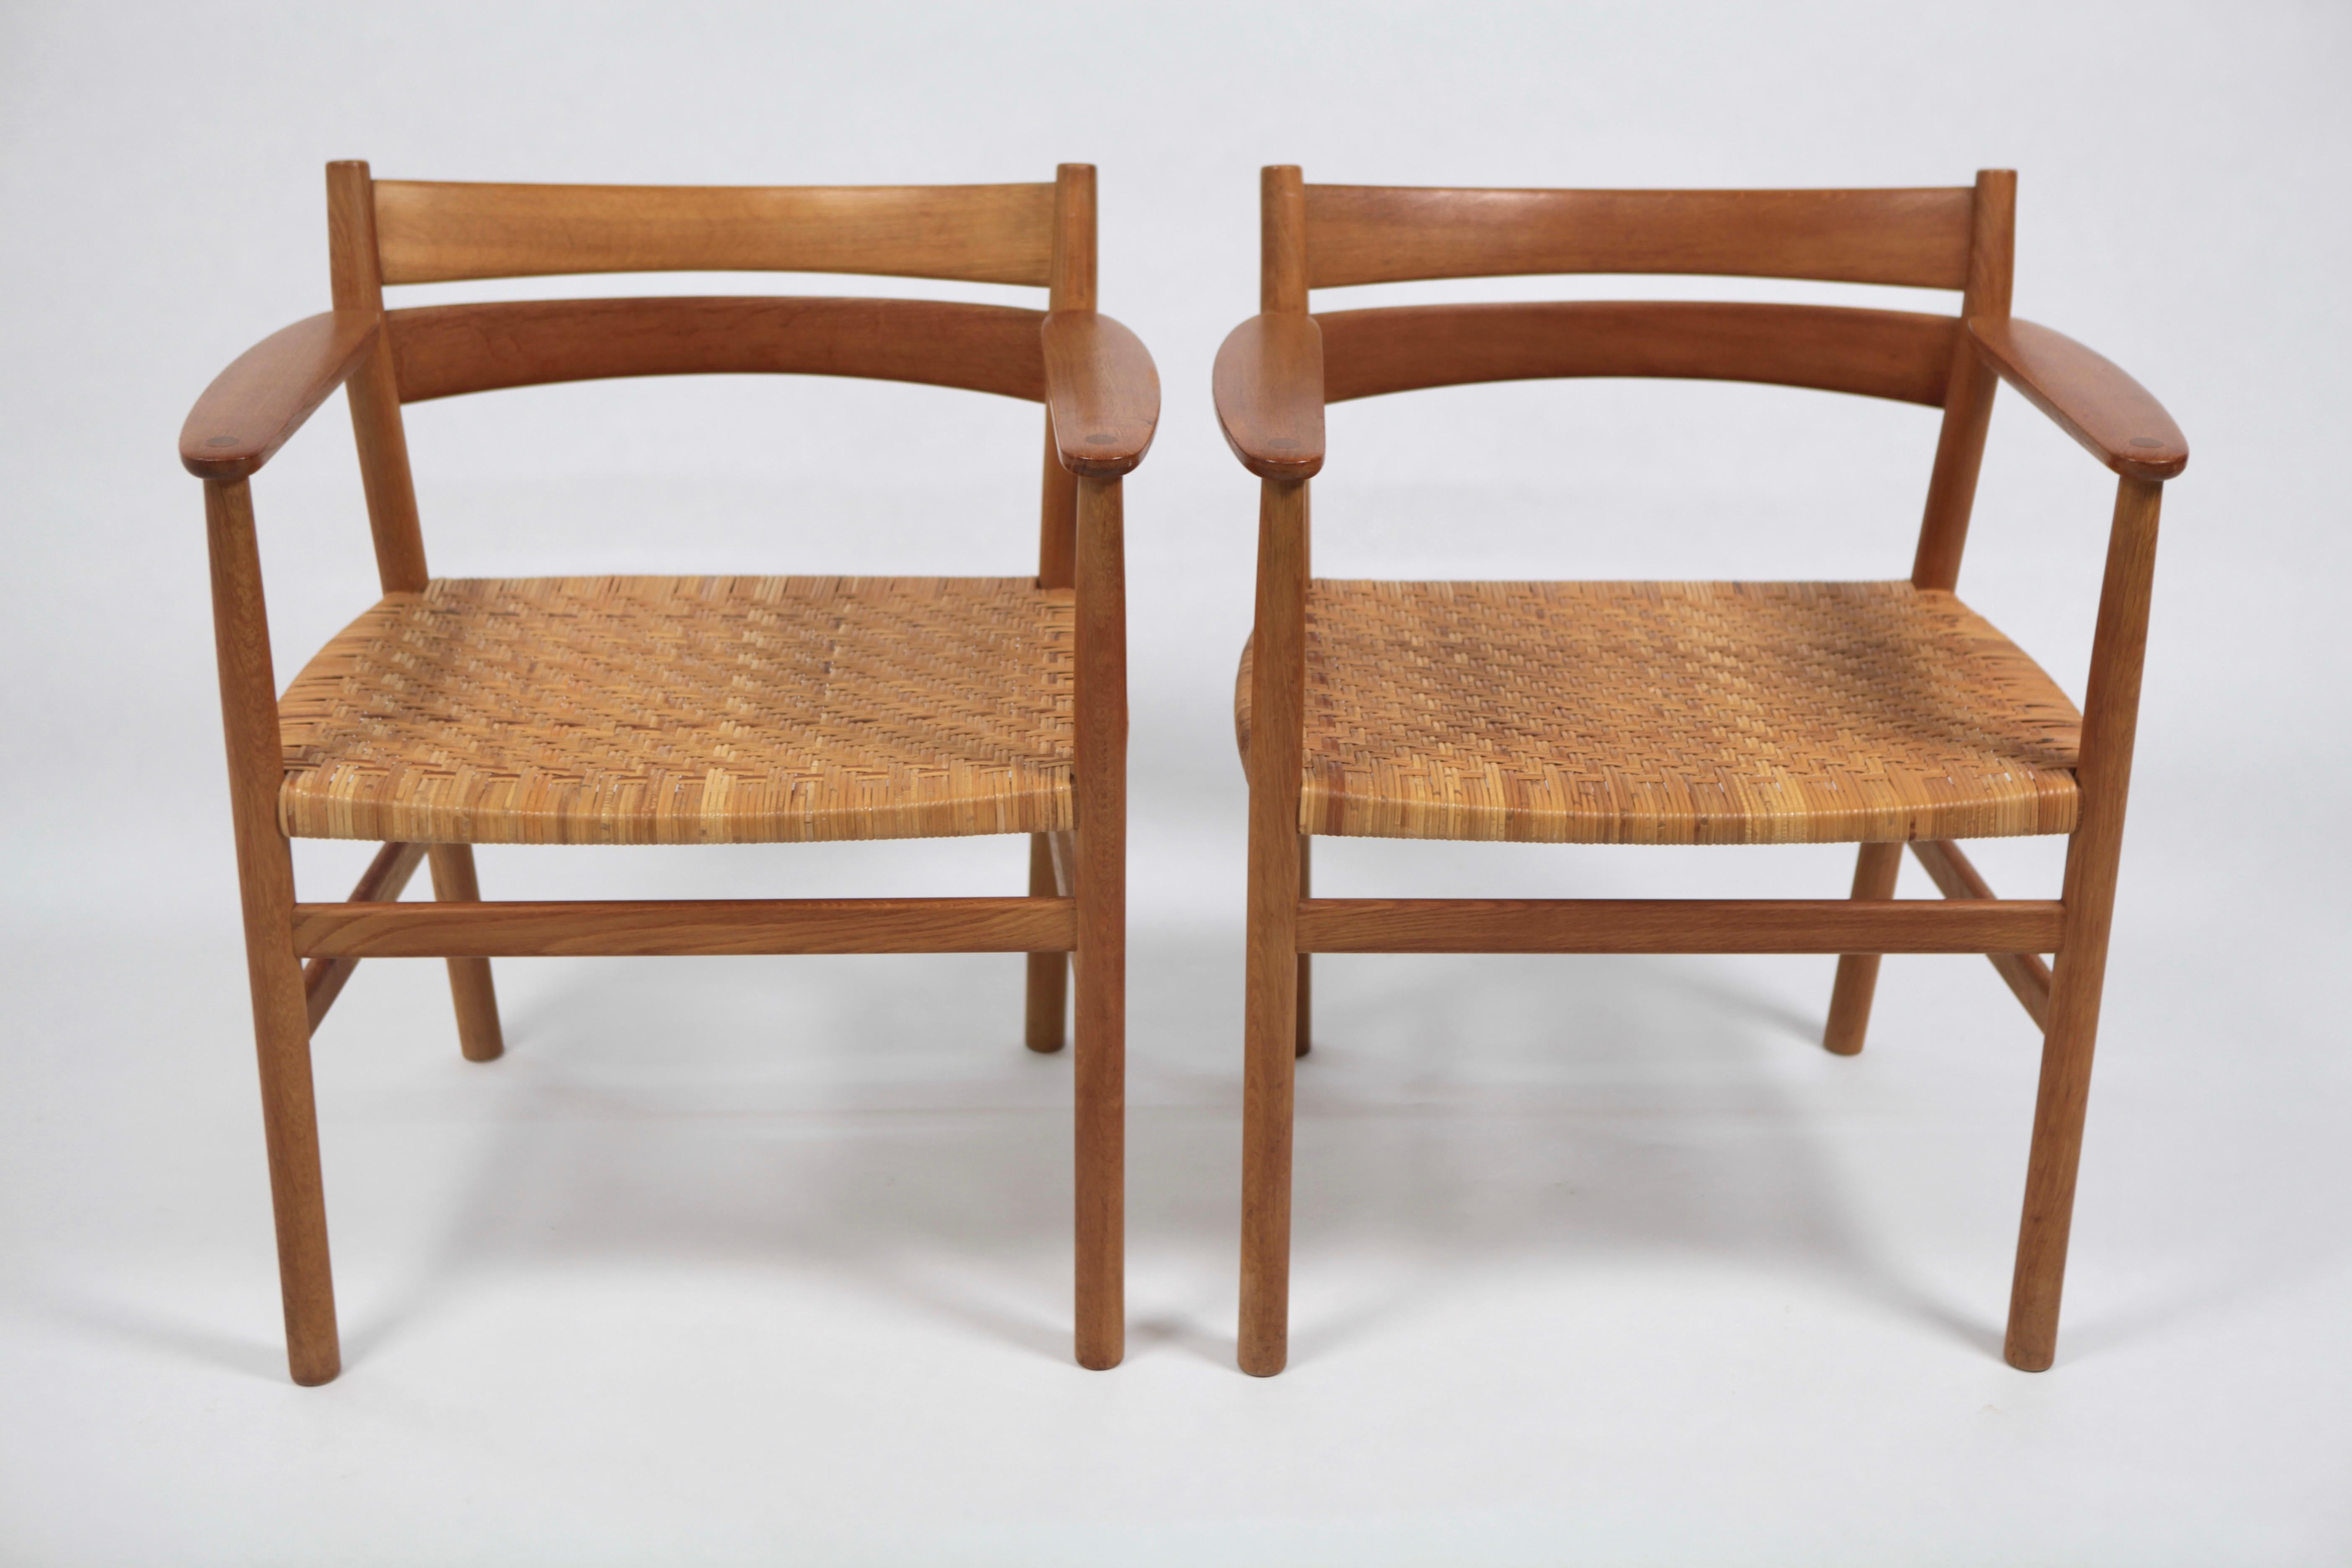 Børge Mogensen, Pair of Rare 'BM1' Armchairs in Oak and Cane, Sweden, 1960s For Sale 11